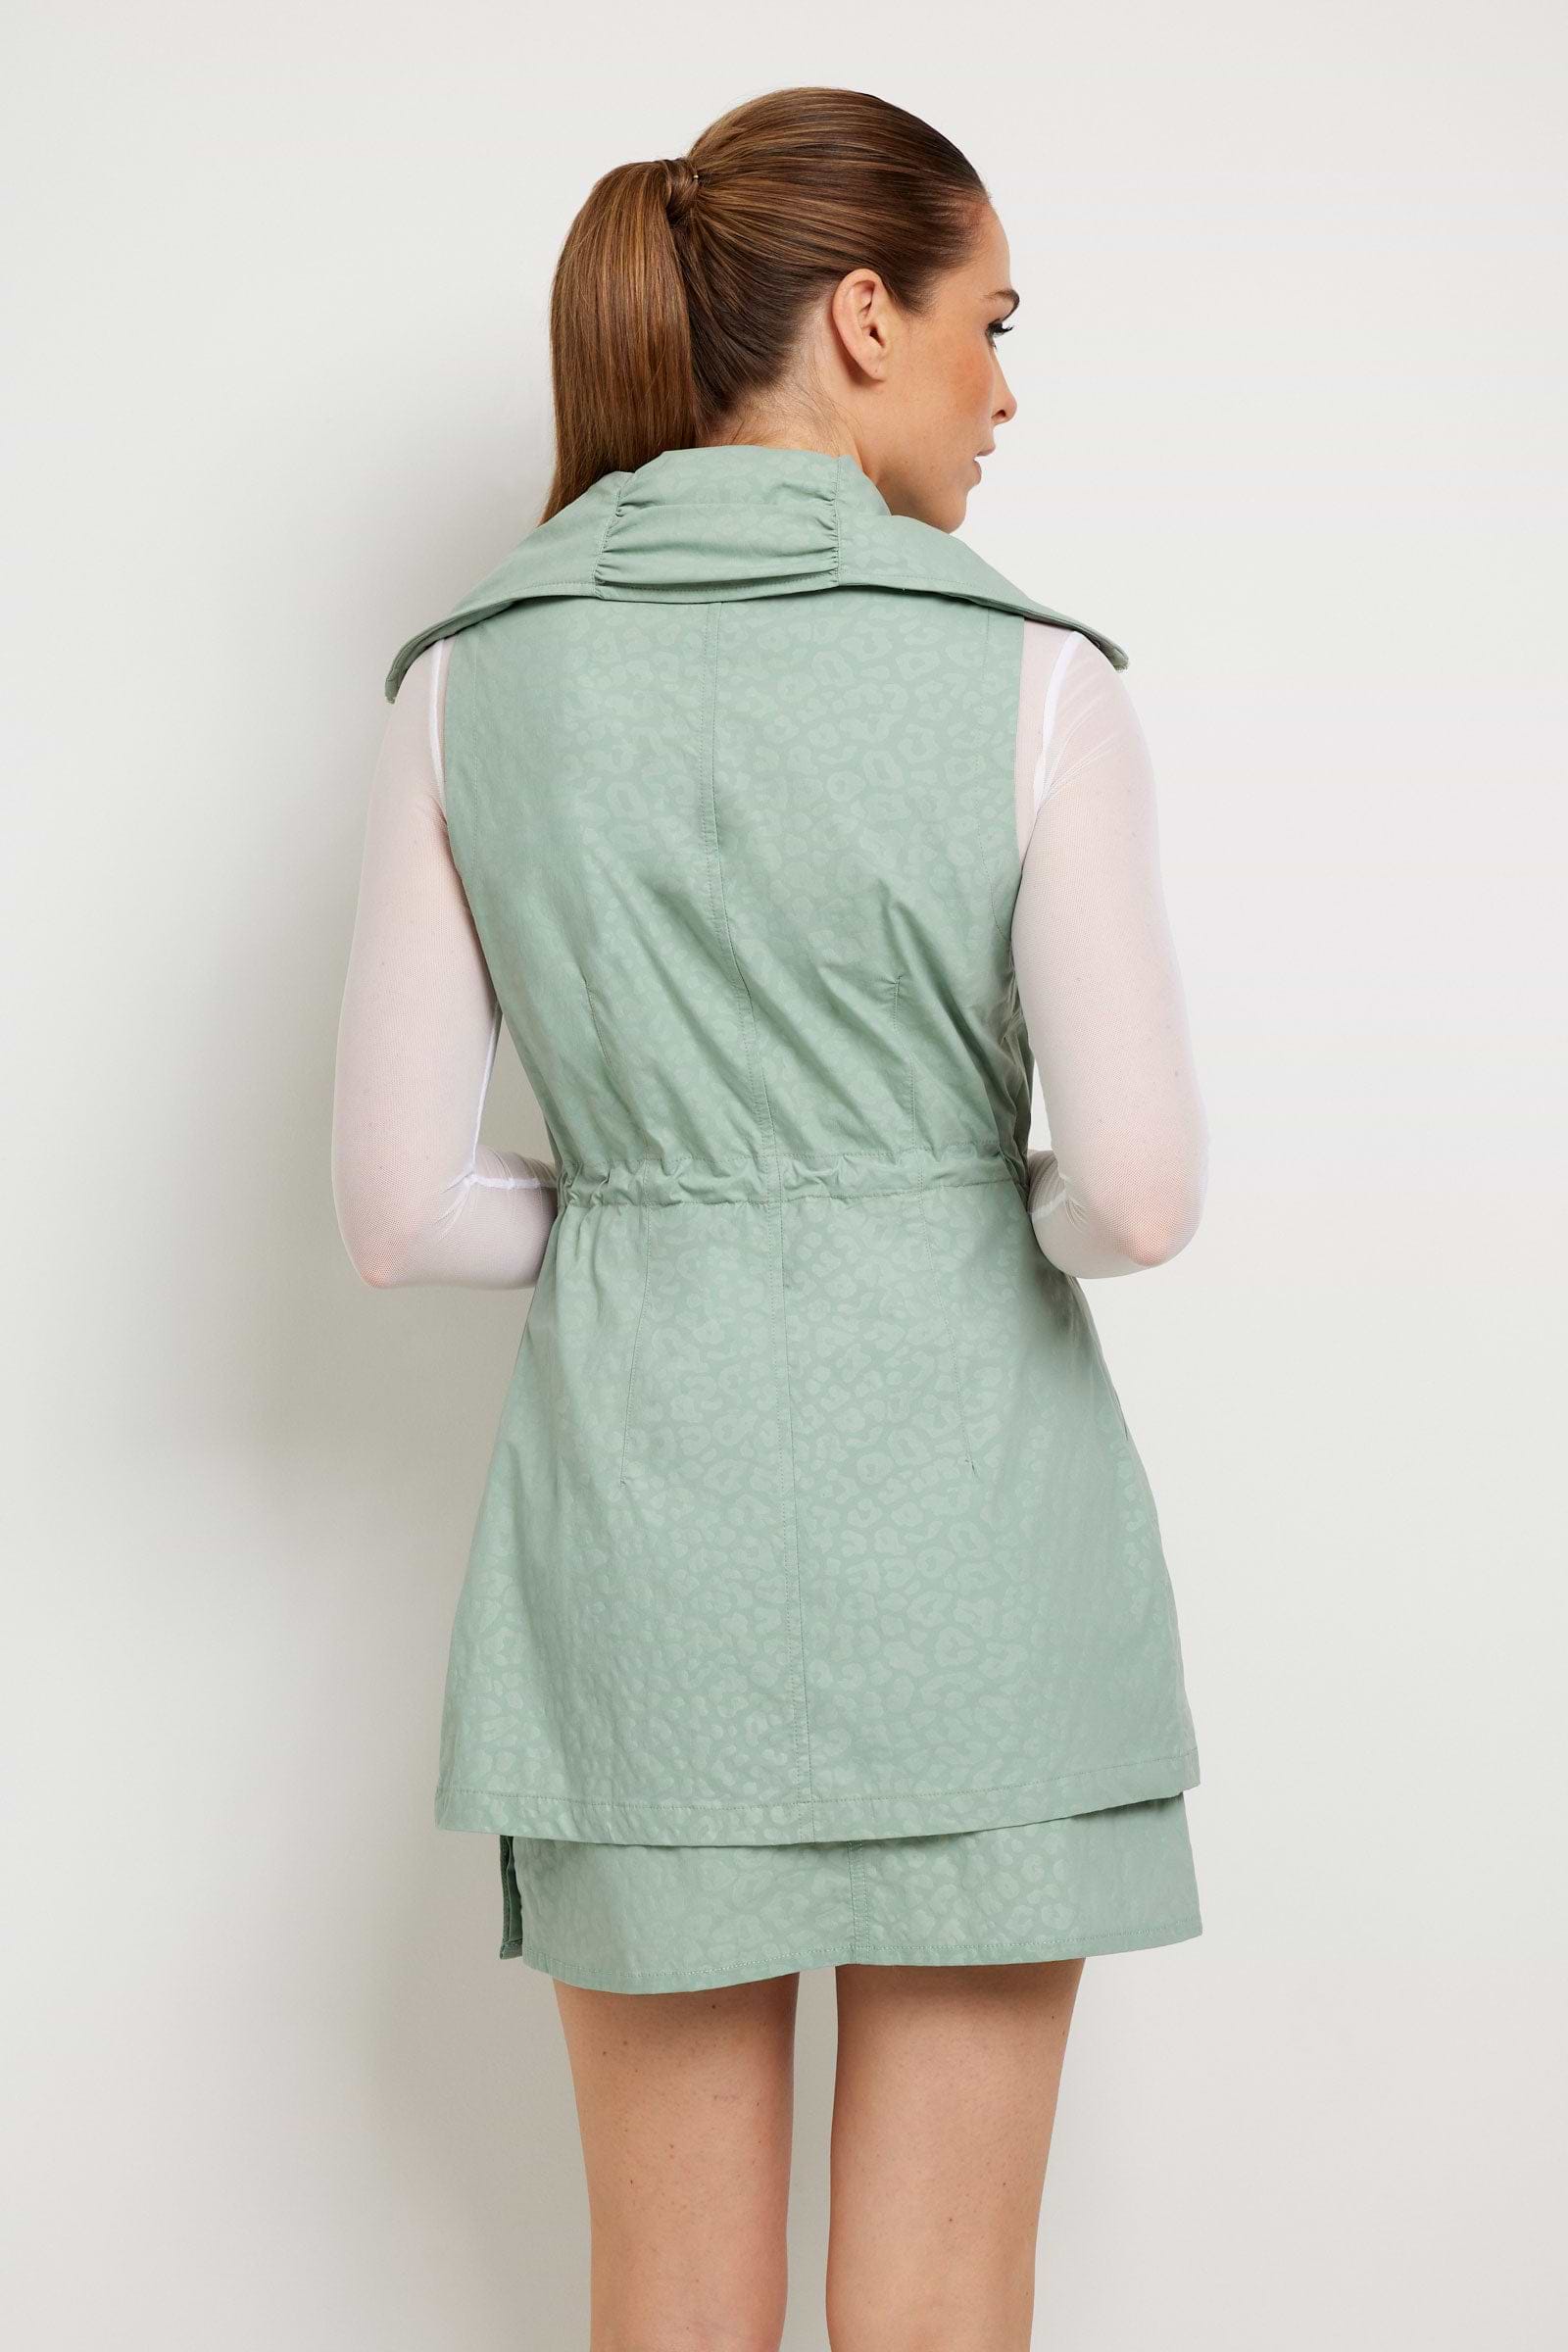 The Best Travel Vest. Woman Showing the Back Profile of an Embossed Delaney Vest in Cheetah Sage.